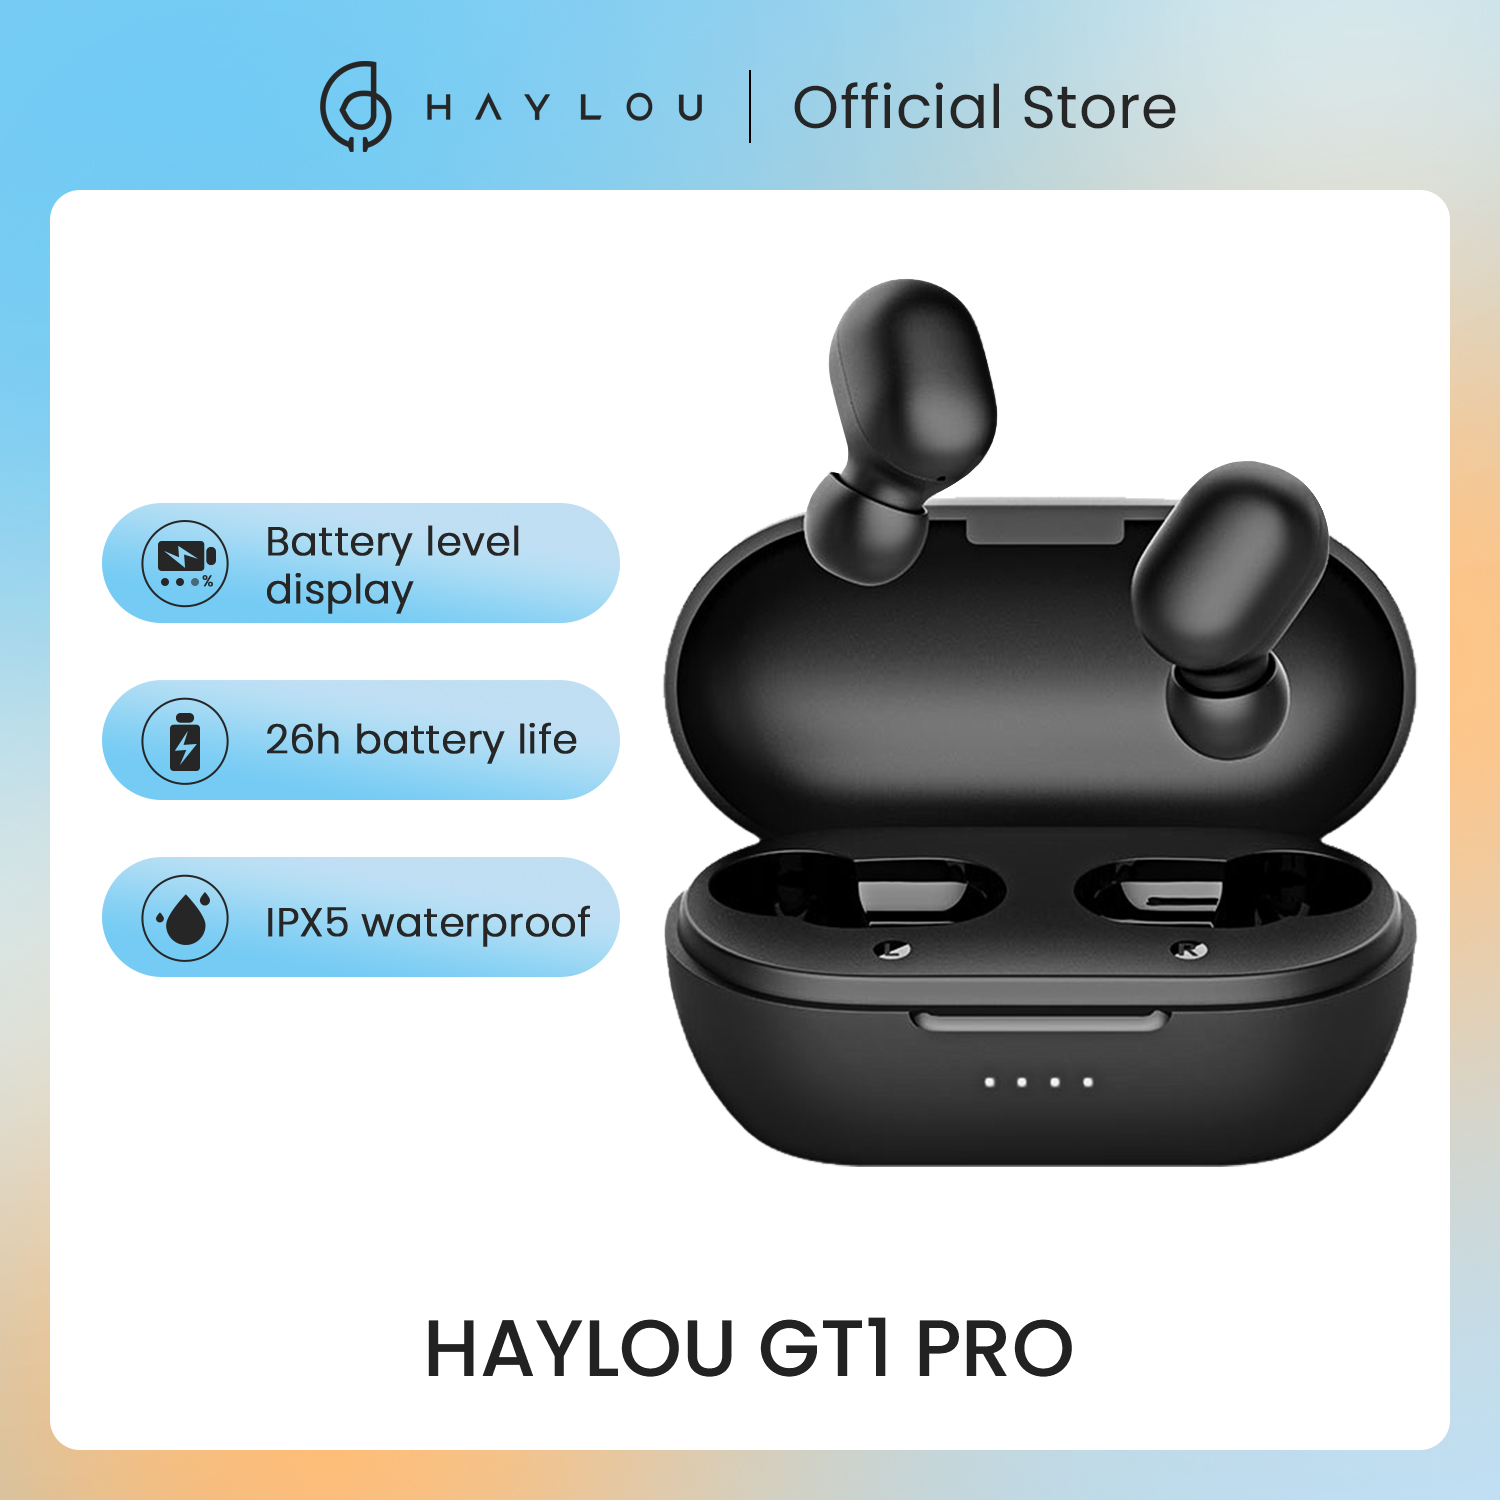 HAYLOU GT1 Pro Long Battery HD Stereo TWS Bluetooth Earphones, Touch Control Wireless Headphones With Dual Mic Noise Isolation